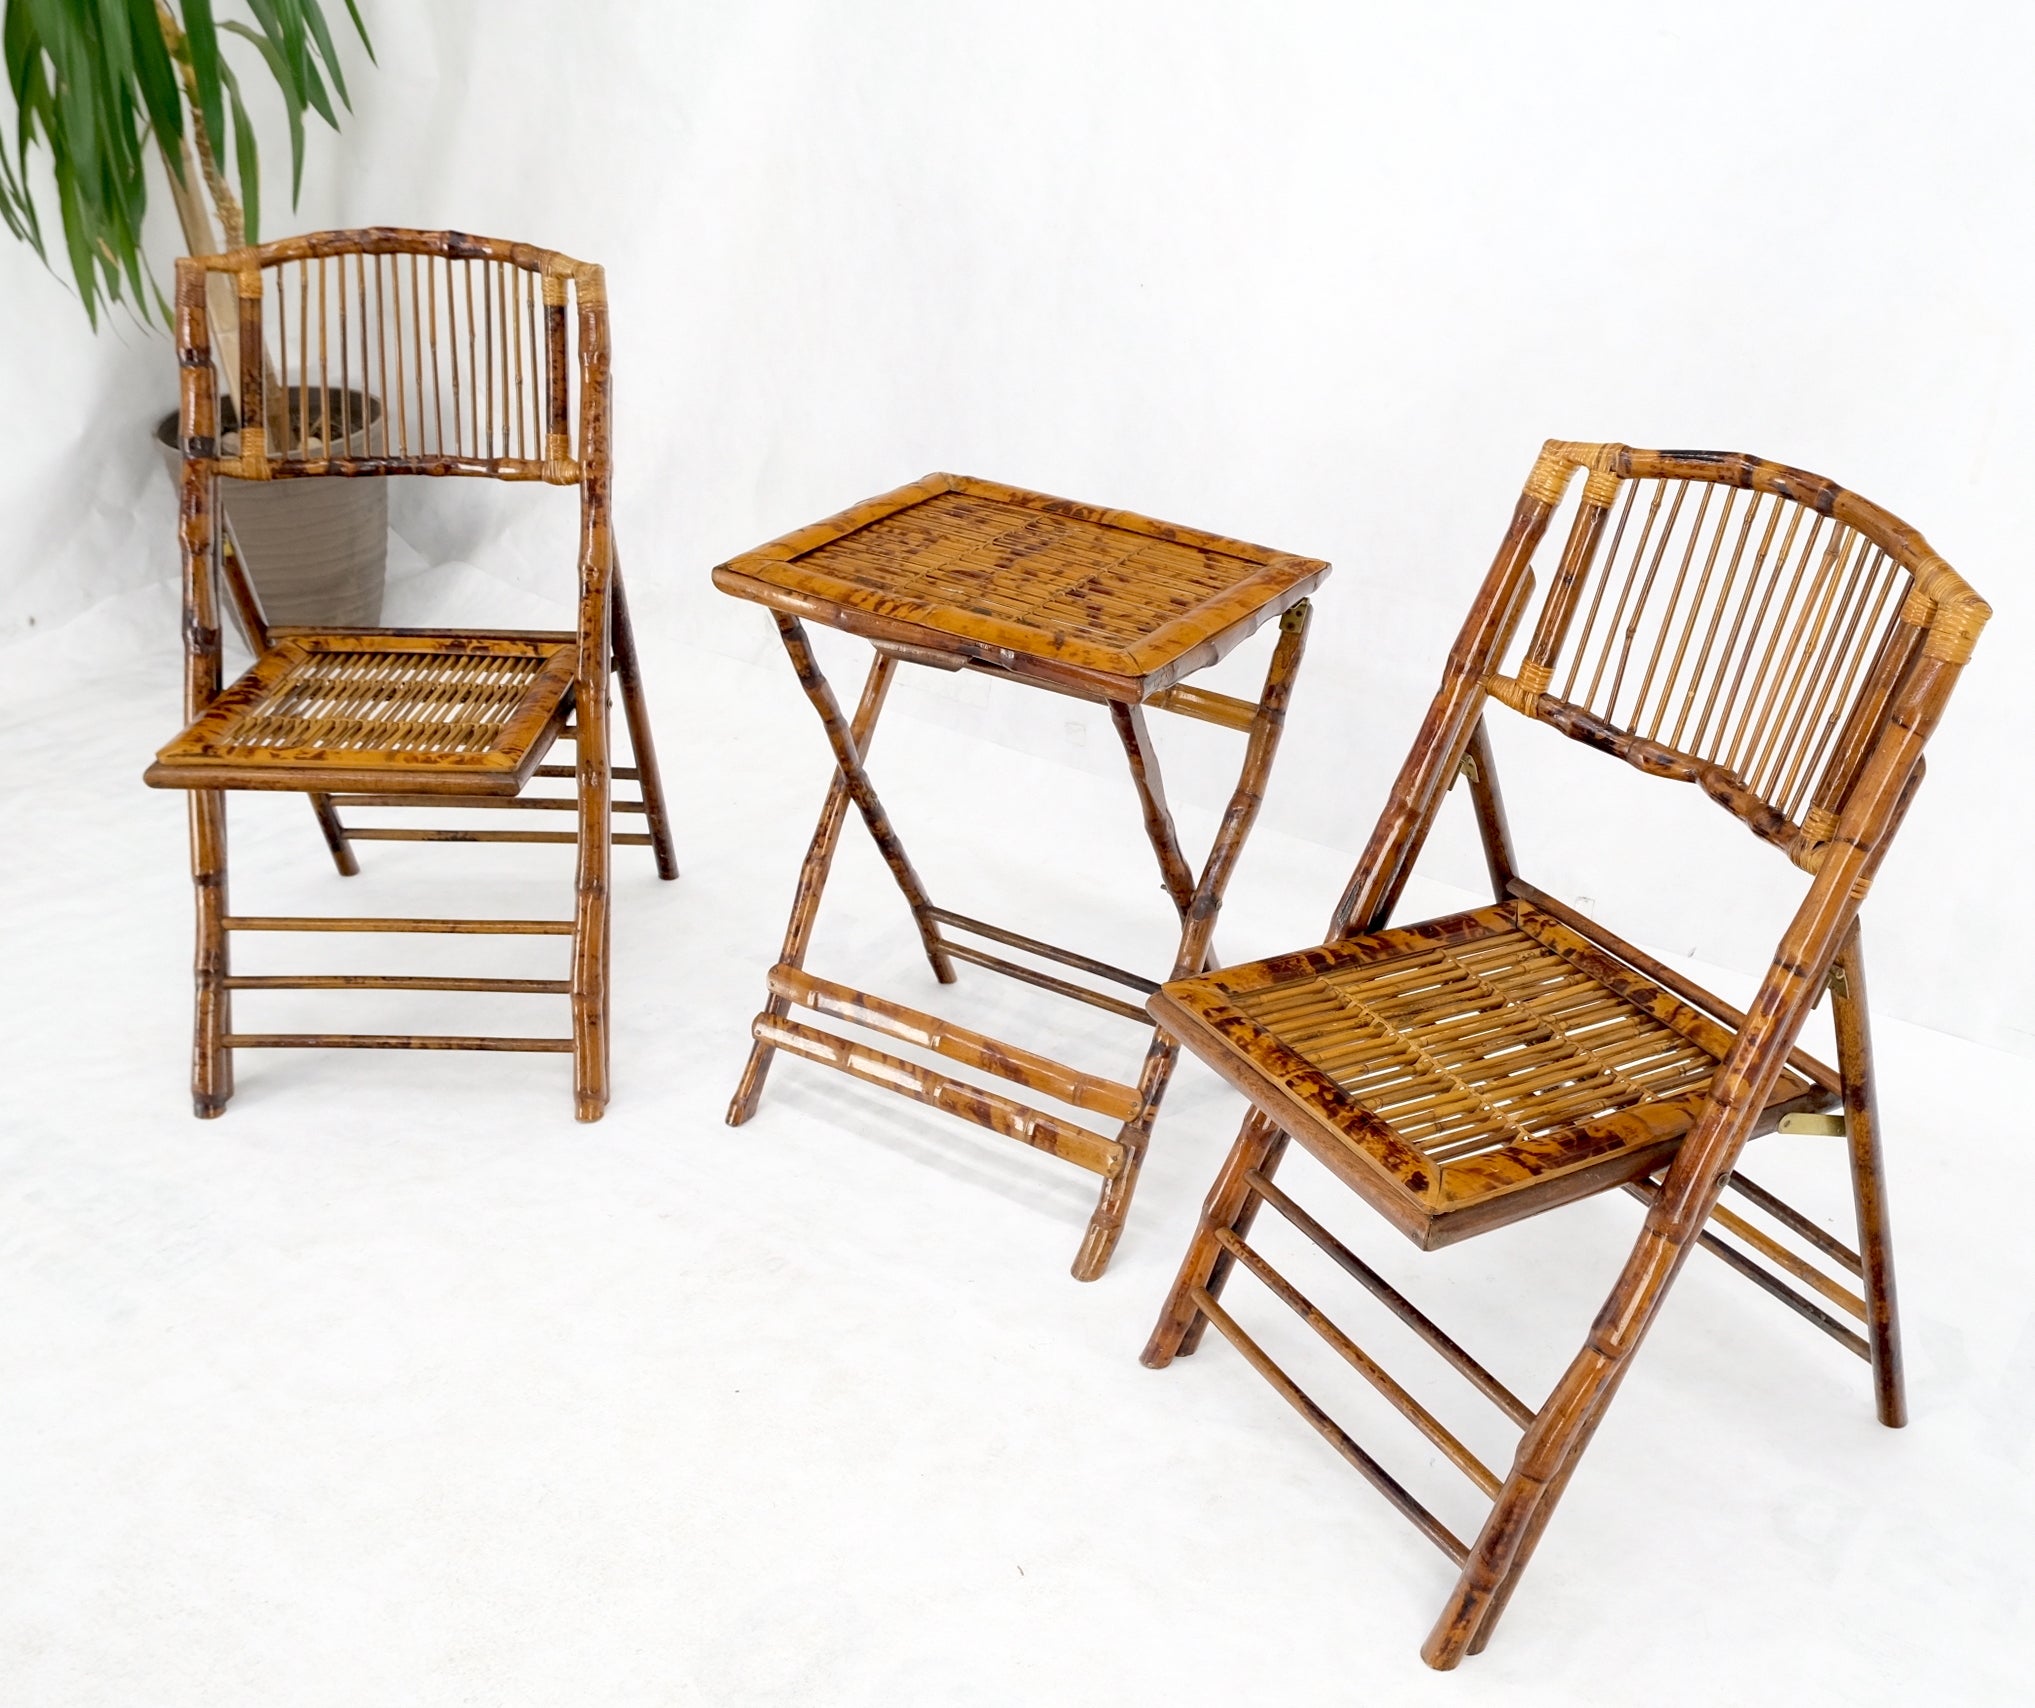 
Burnt Bamboo Vintage Folding Cafe Occasional Table w/ Two Matching Chairs Set MINT!
Table Dimensions: 15d x 20w x 25h 